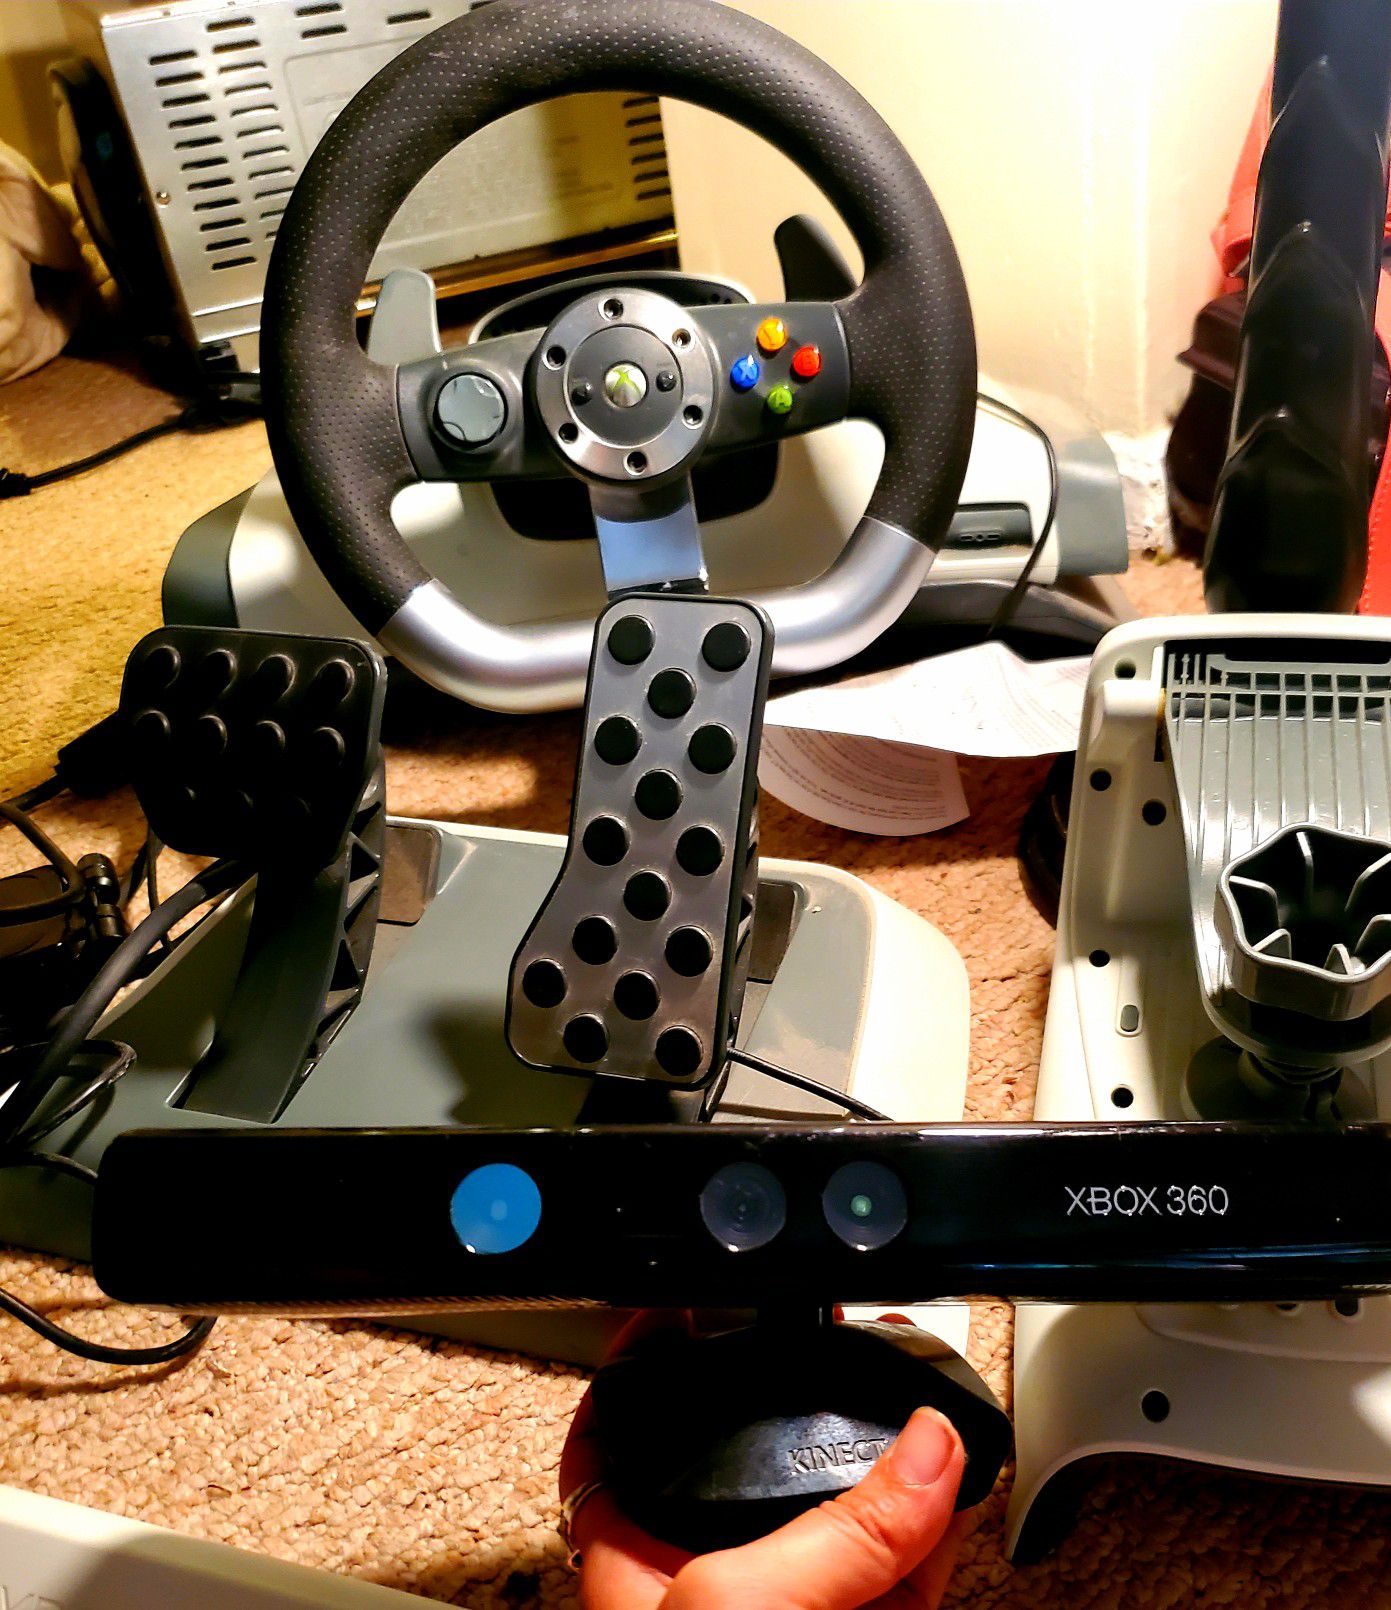 We have a Microsoft Xbox 360 Steering wheel and pedals